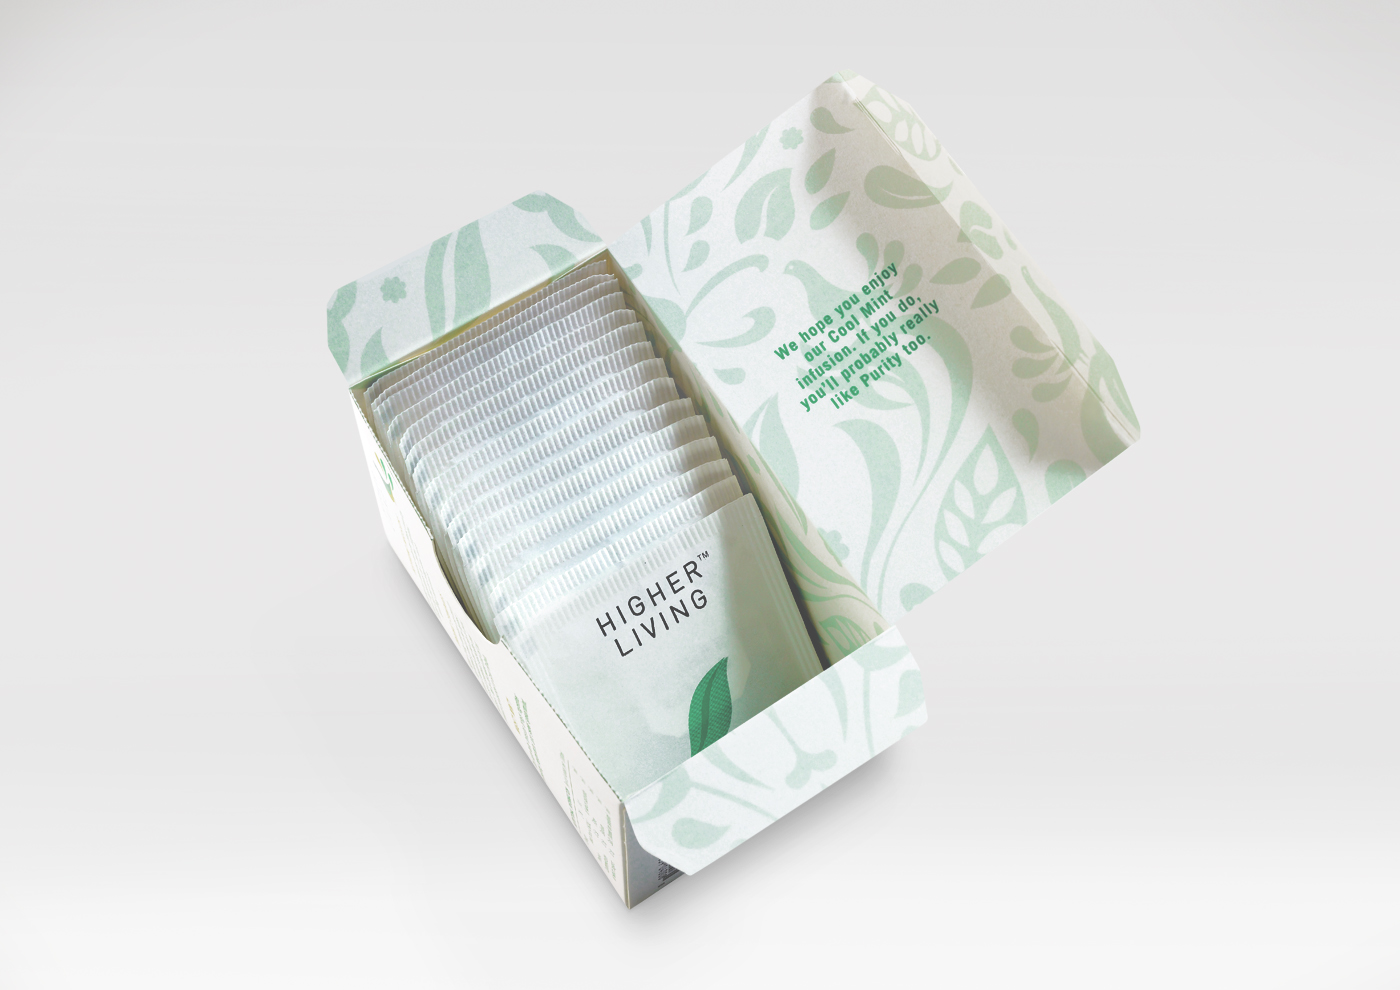 Packaging with illustrative detail designed by B&B Studio for UK herbal tea company brand Higher Living